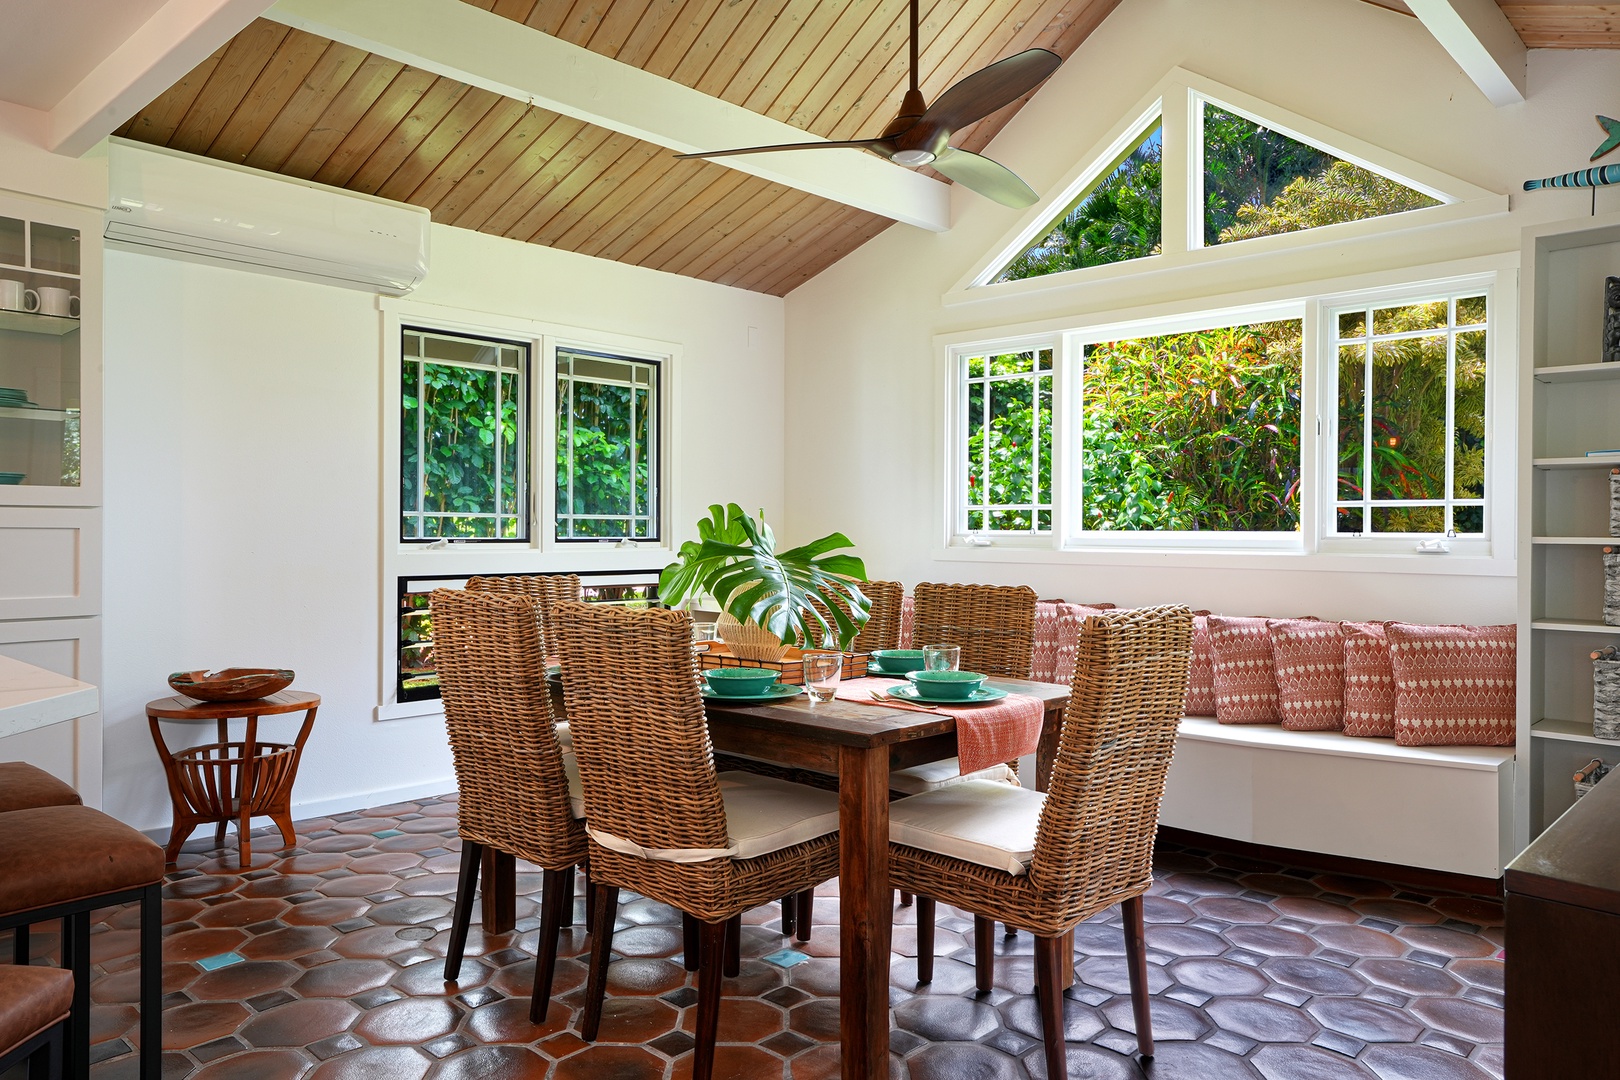 Princeville Vacation Rentals, Kaiana Villa - Our Princeville vacation rental is the perfect home base for exploring the natural beauty and adventure of Kauai